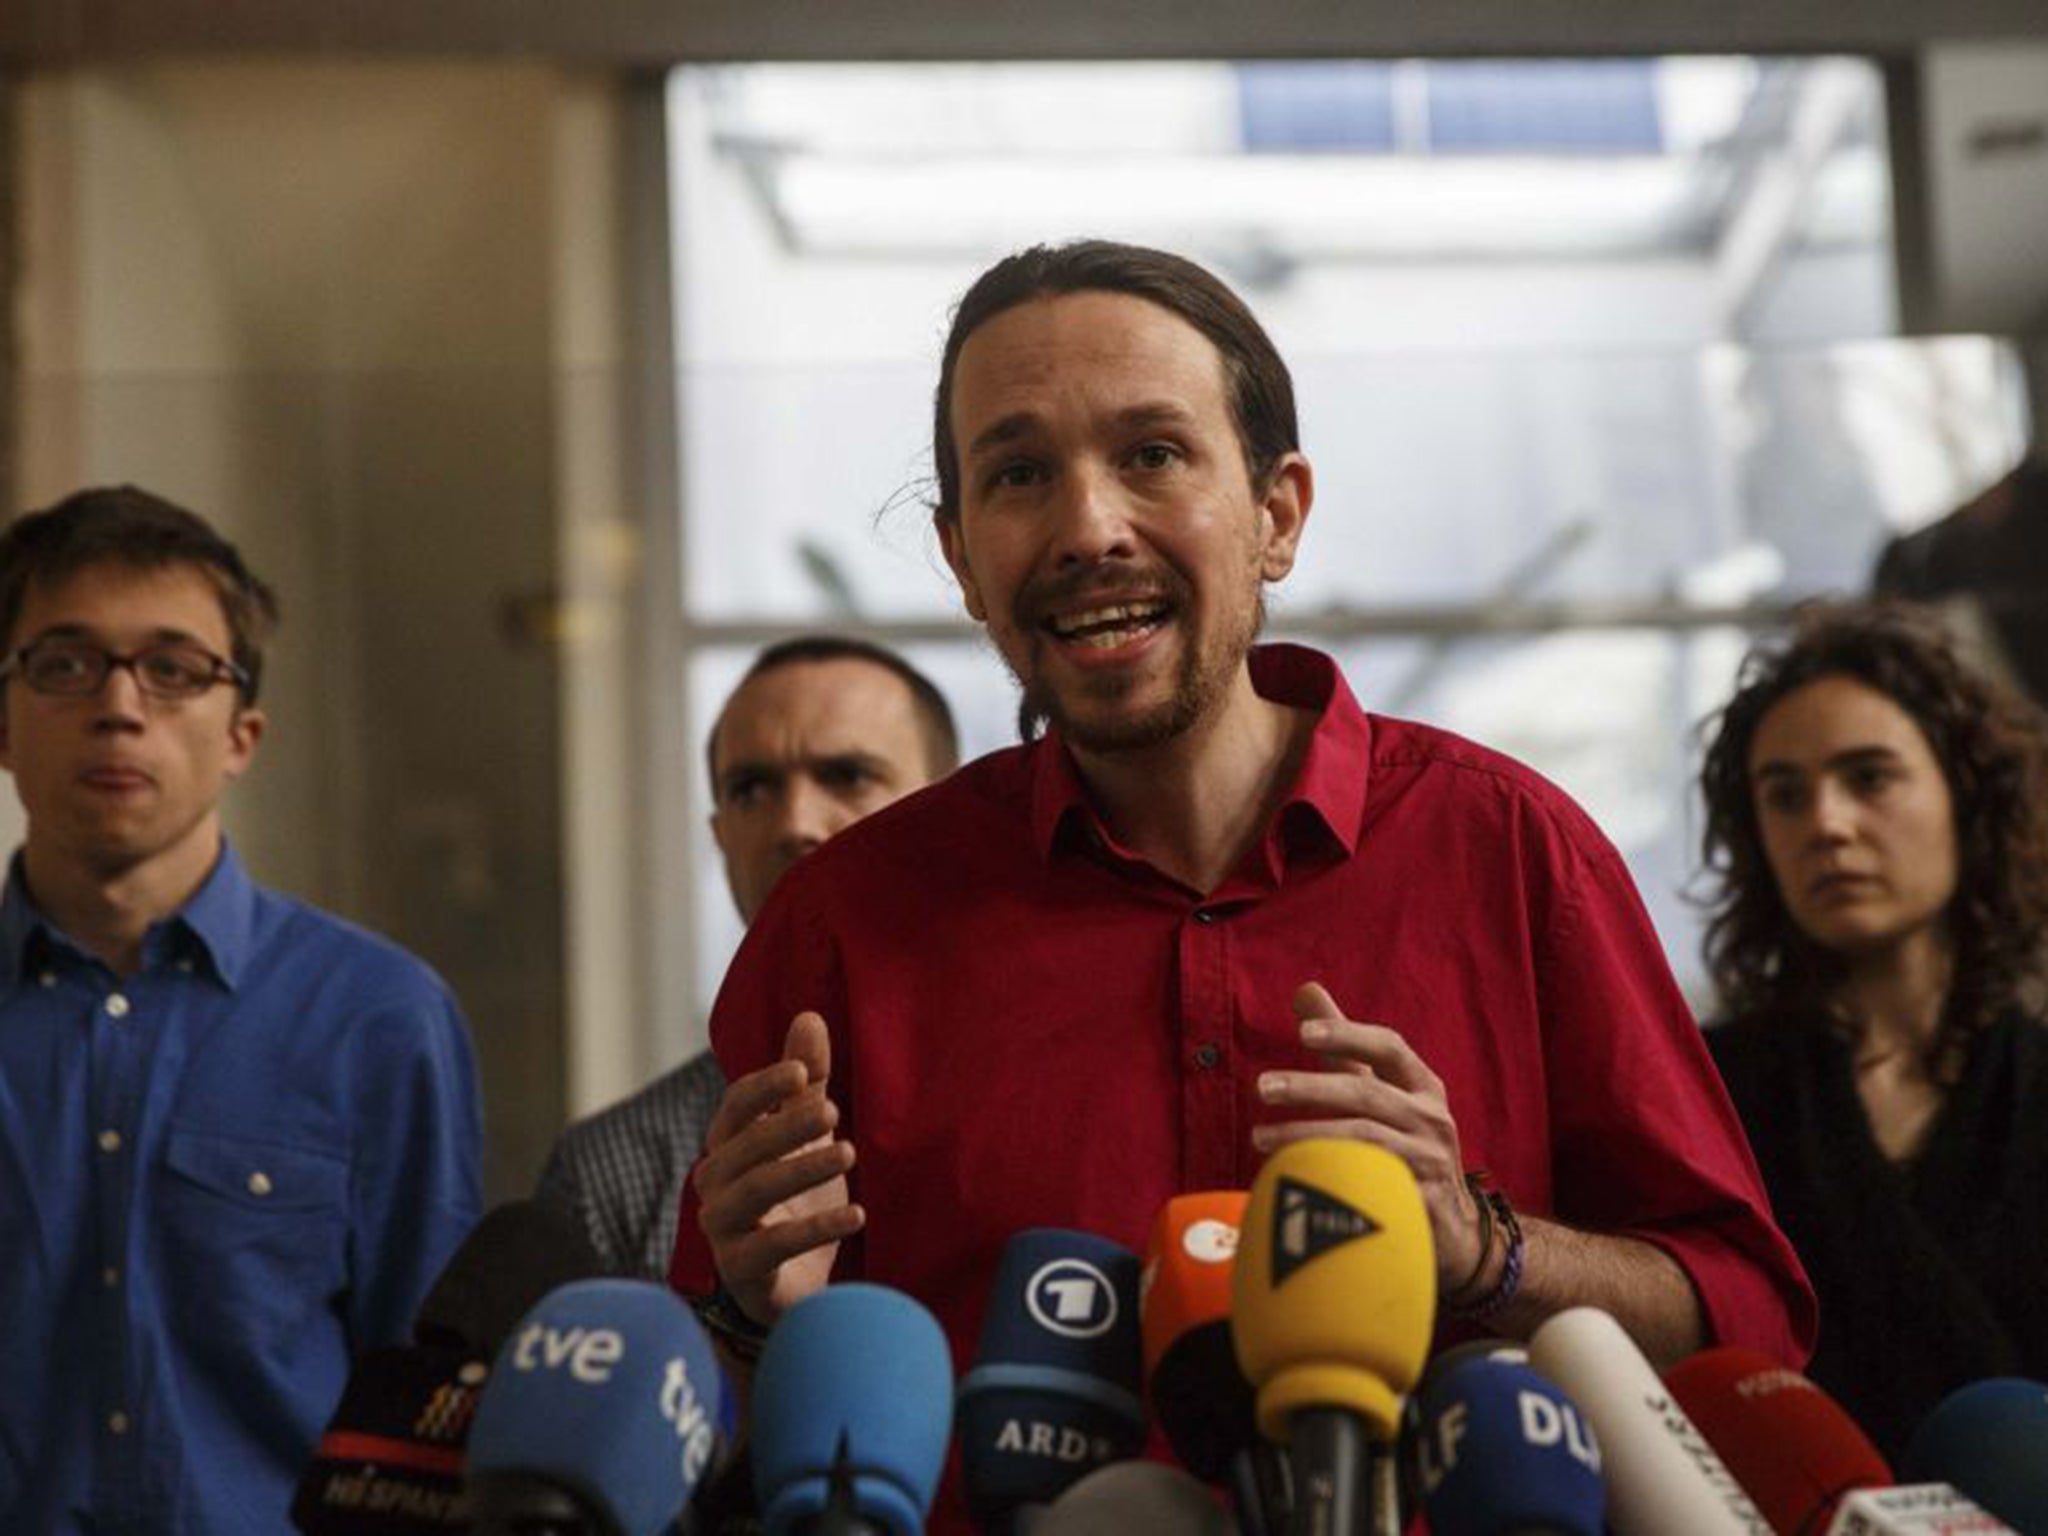 Pablo Iglesias, the leader of Spain’s anti-austerity party Podemos, appeared at a Syriza rally (Reuters)